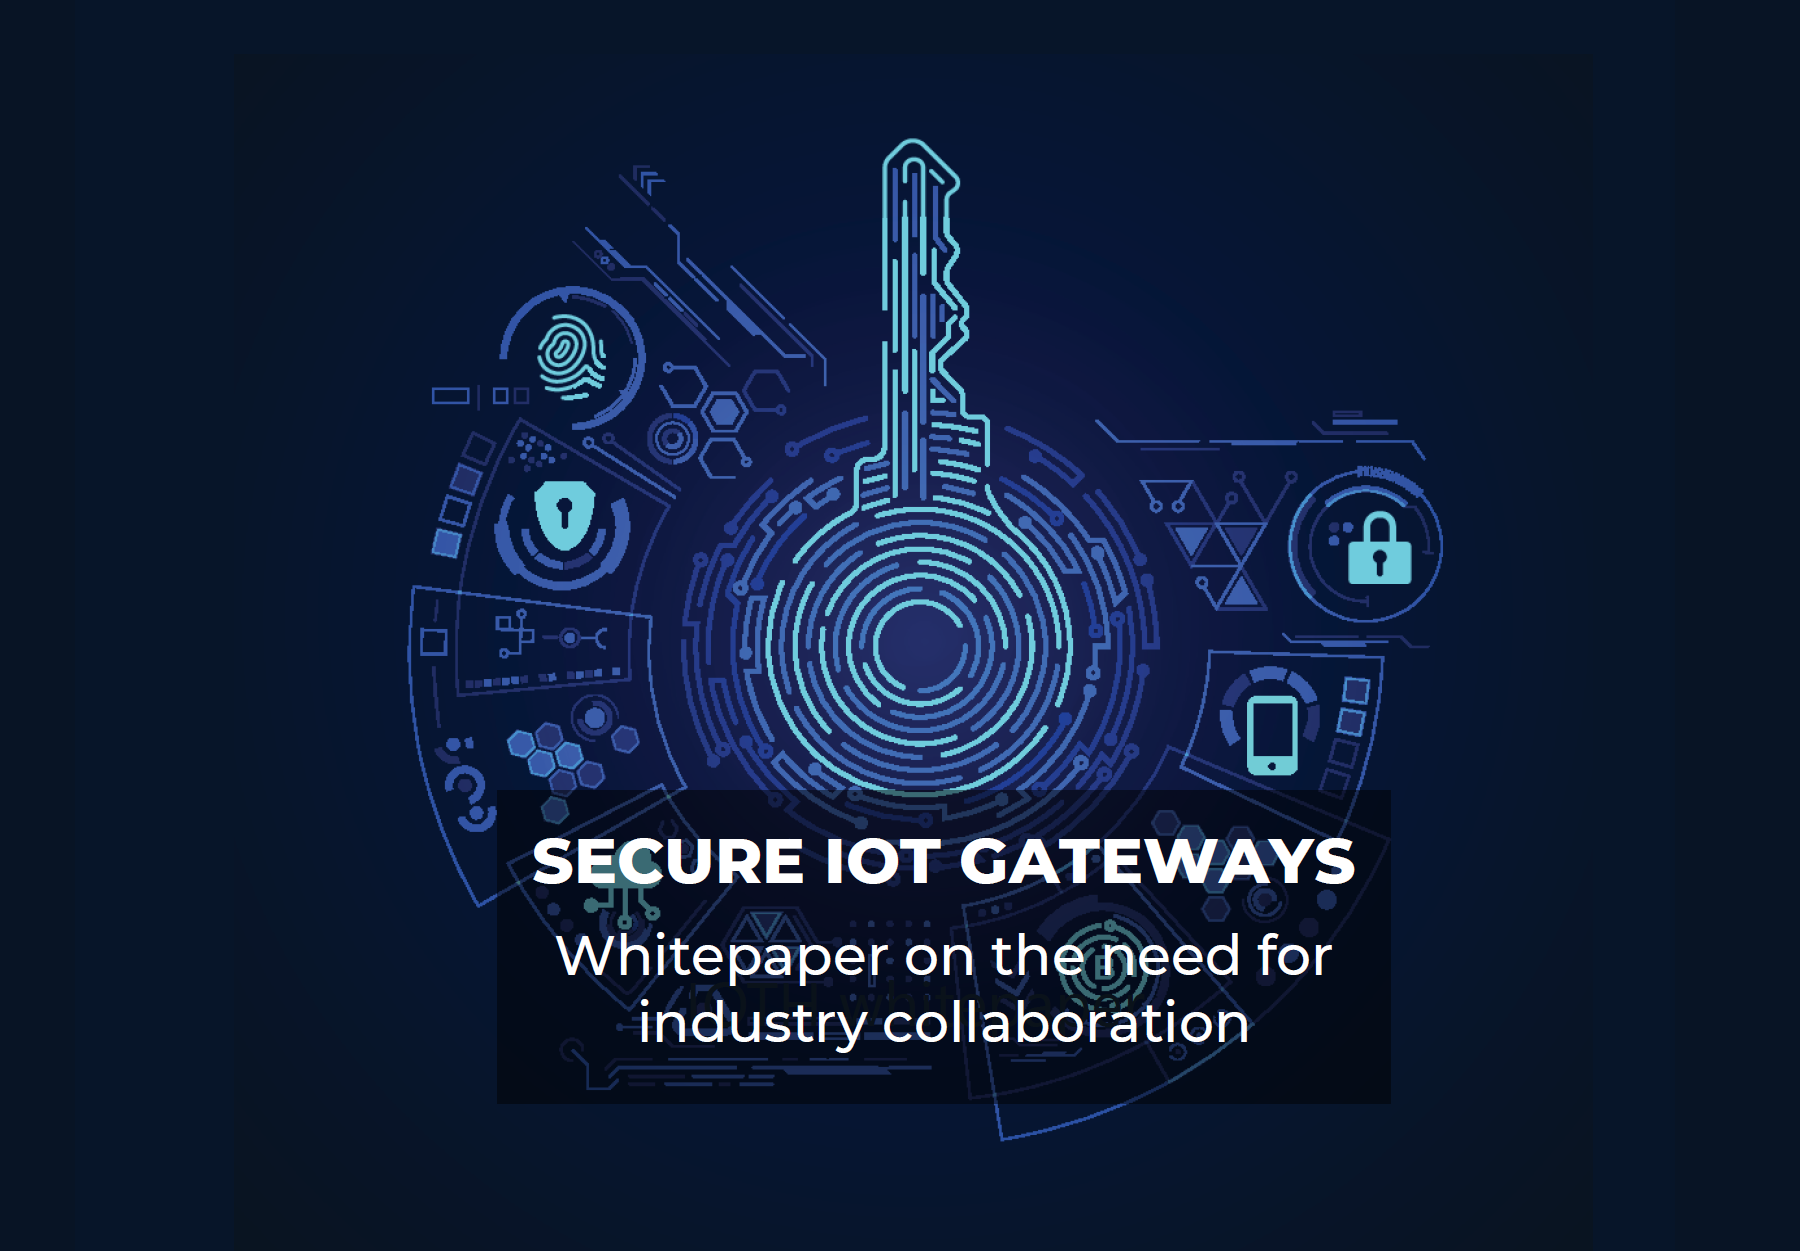 Secure IoT Gateways - Whitepaper on the need for industry collaboration